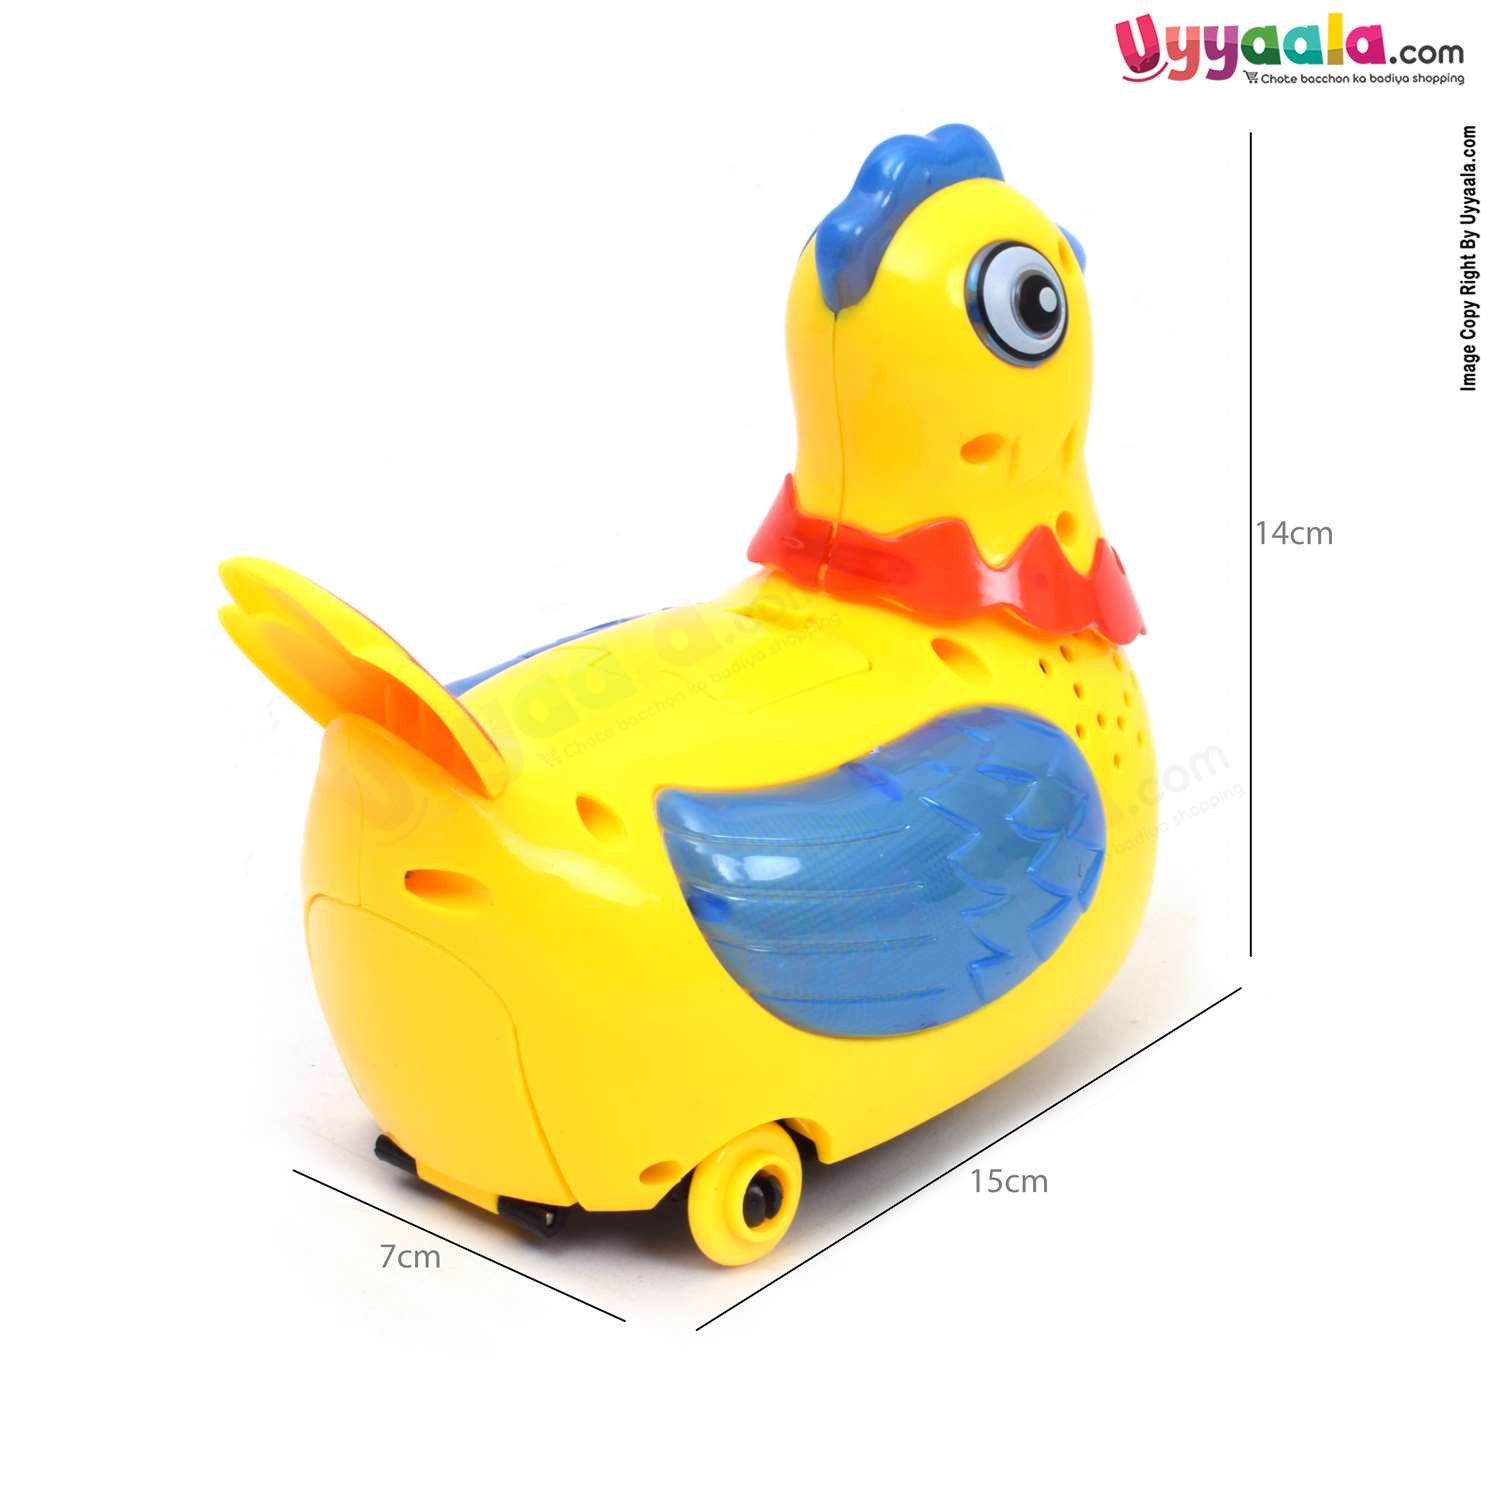 Hen will lay eggs battery operated toy with egg export